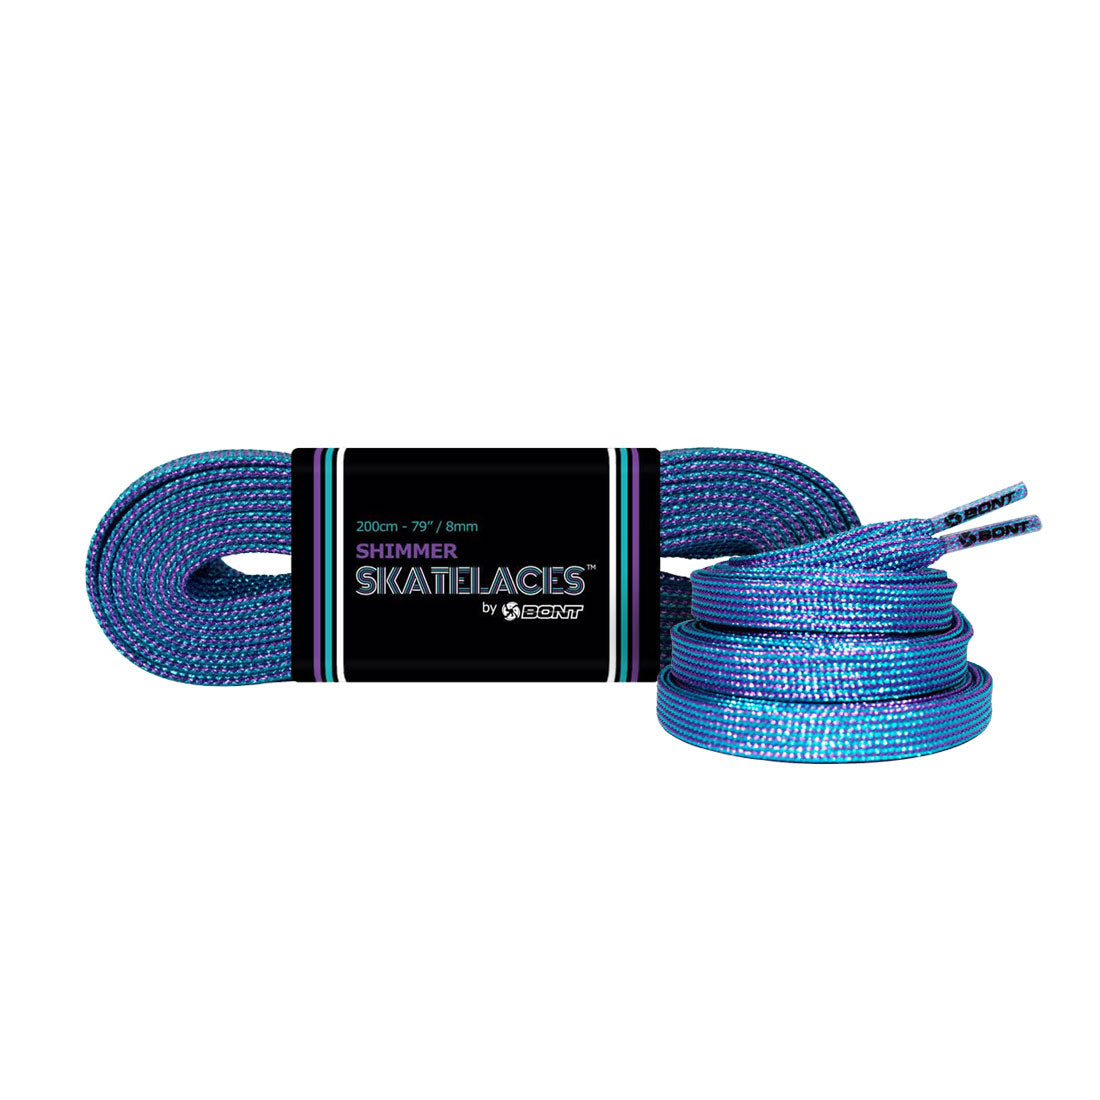 Bont Shimmer 8mm Laces - 275cm/108in Mermaid Dream Laces